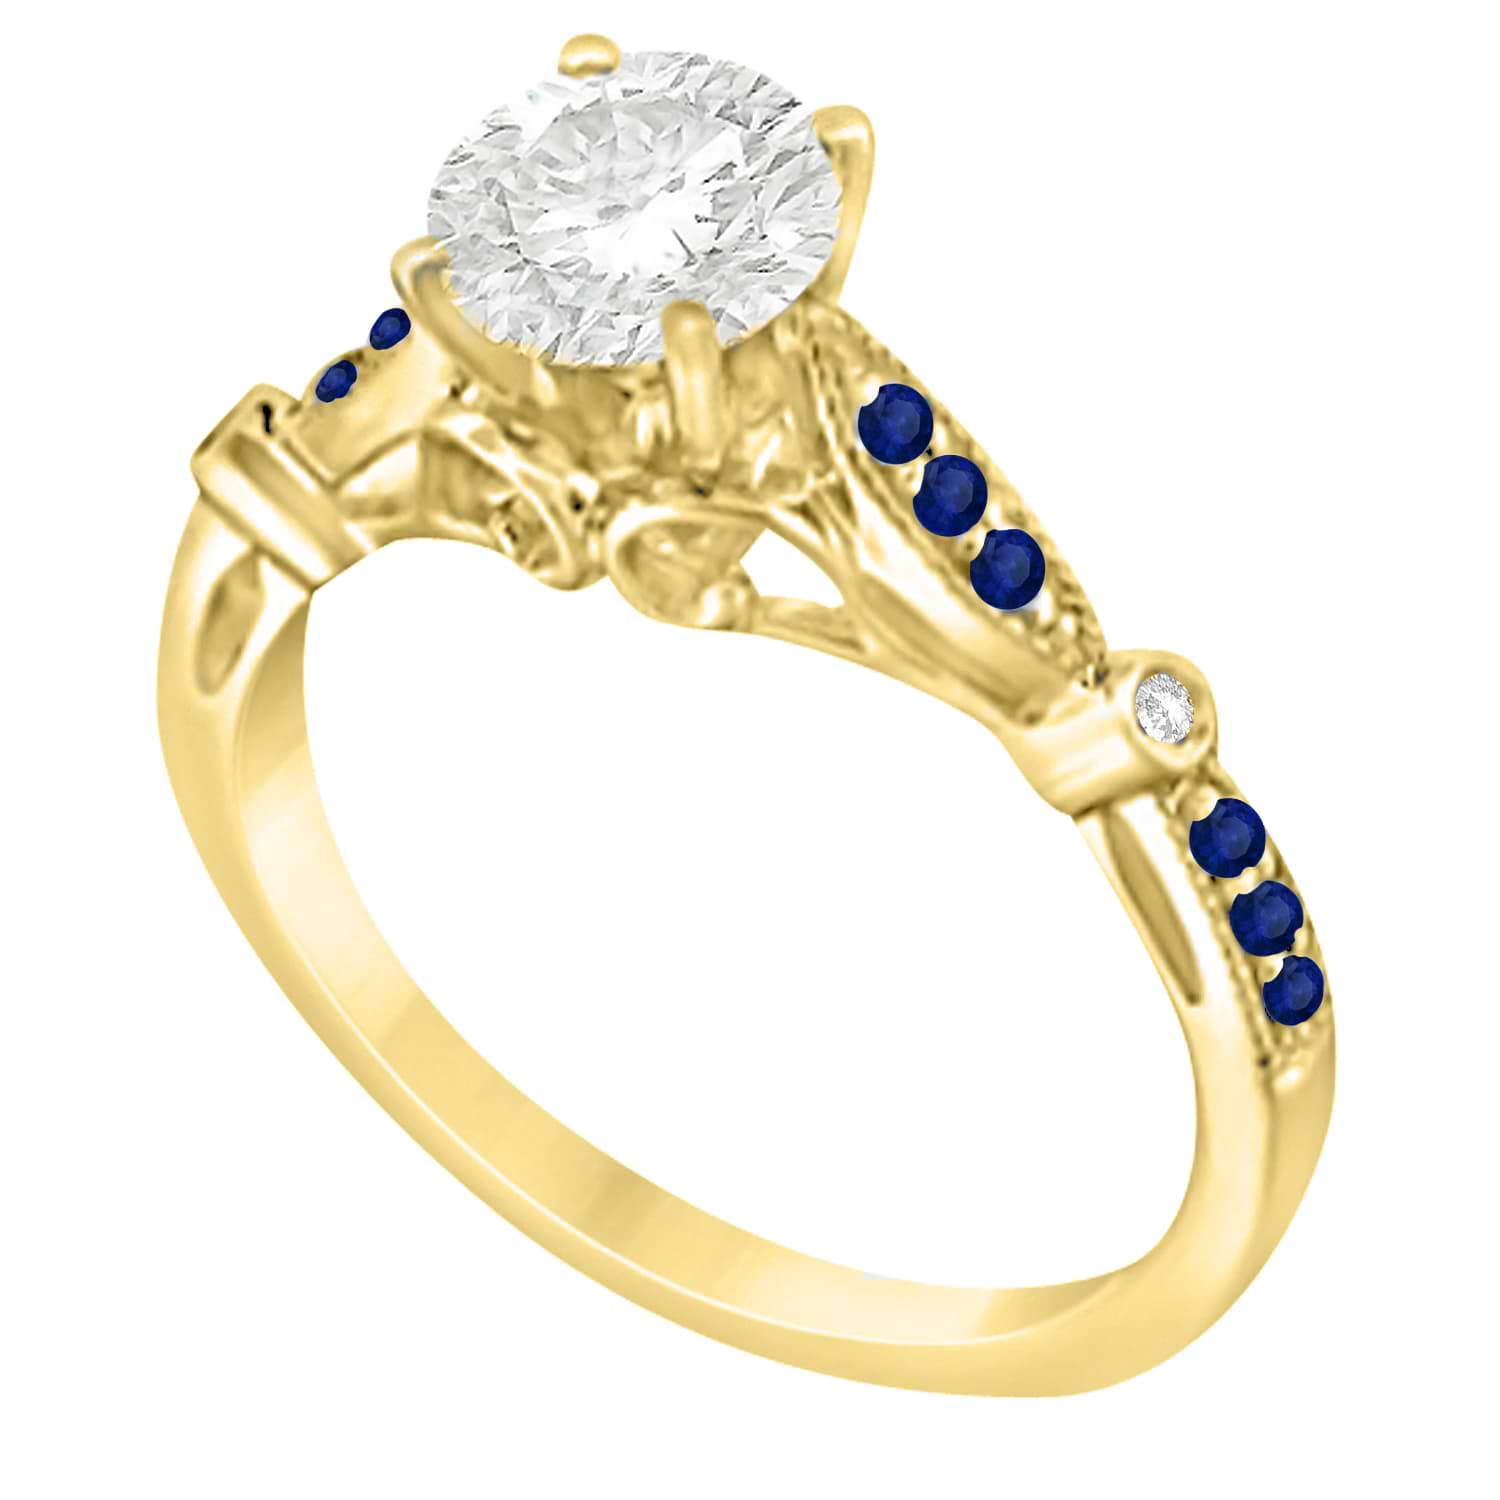 Marquise & Dot Blue Sapphire Vintage Engagement Ring 14k Yellow Gold 0.13ct